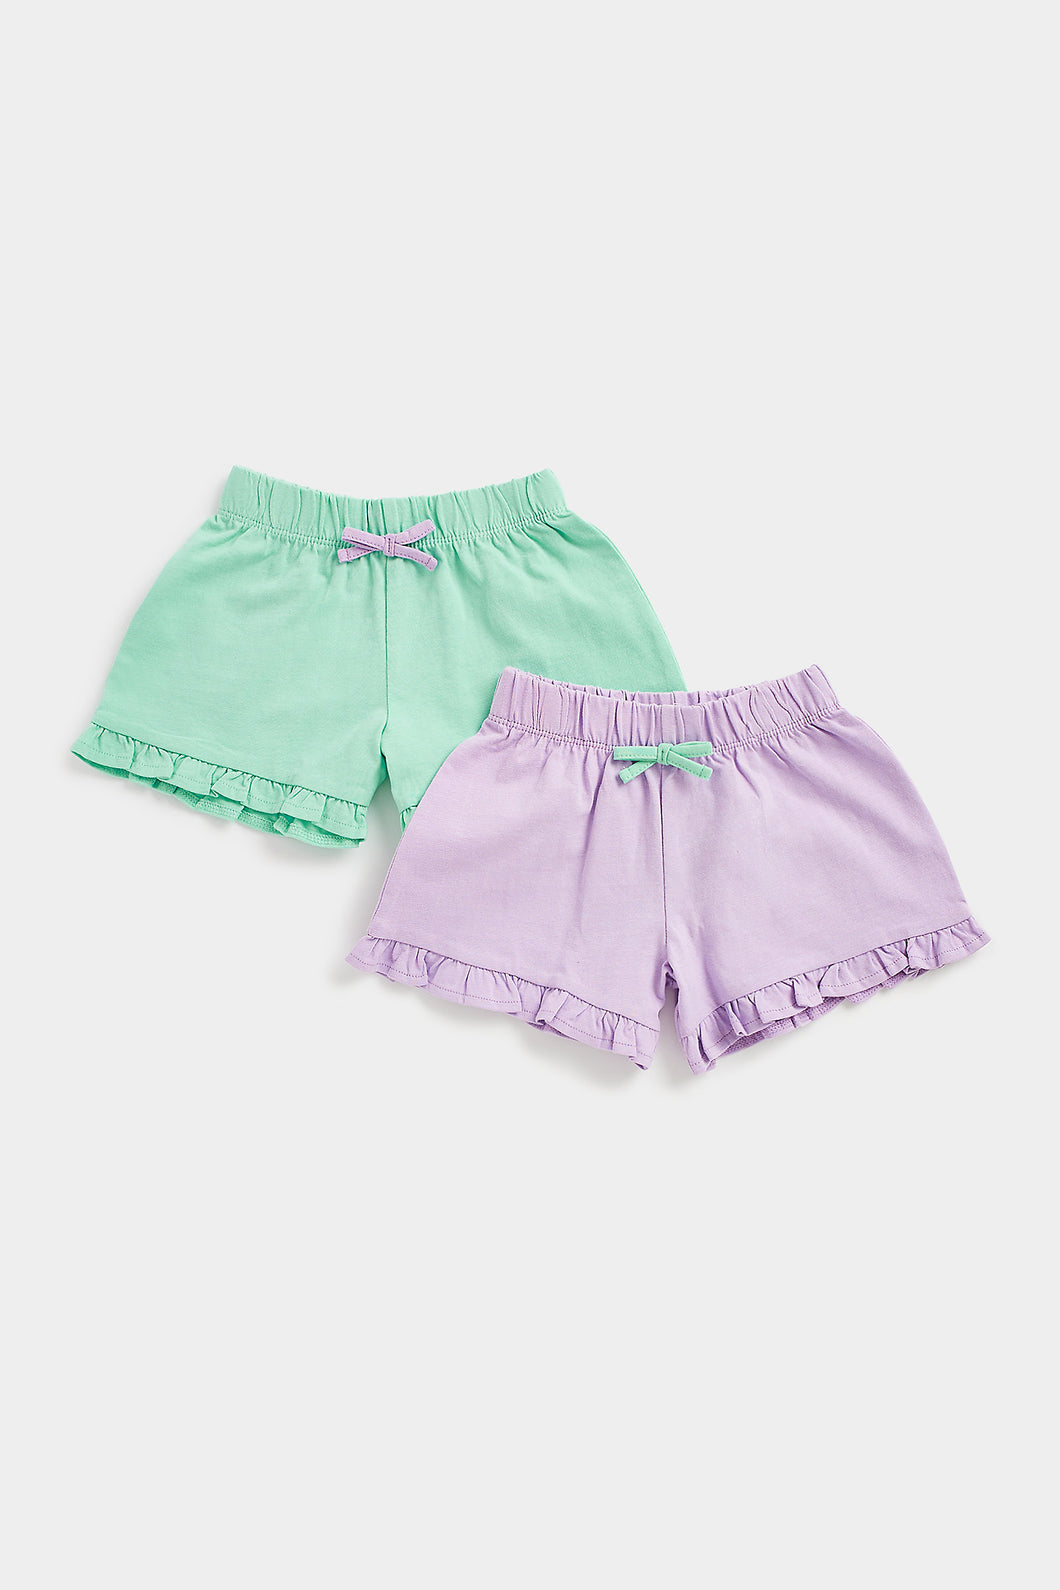 Mothercare Lilac And Mint Jersey Shorts - 2 Pack